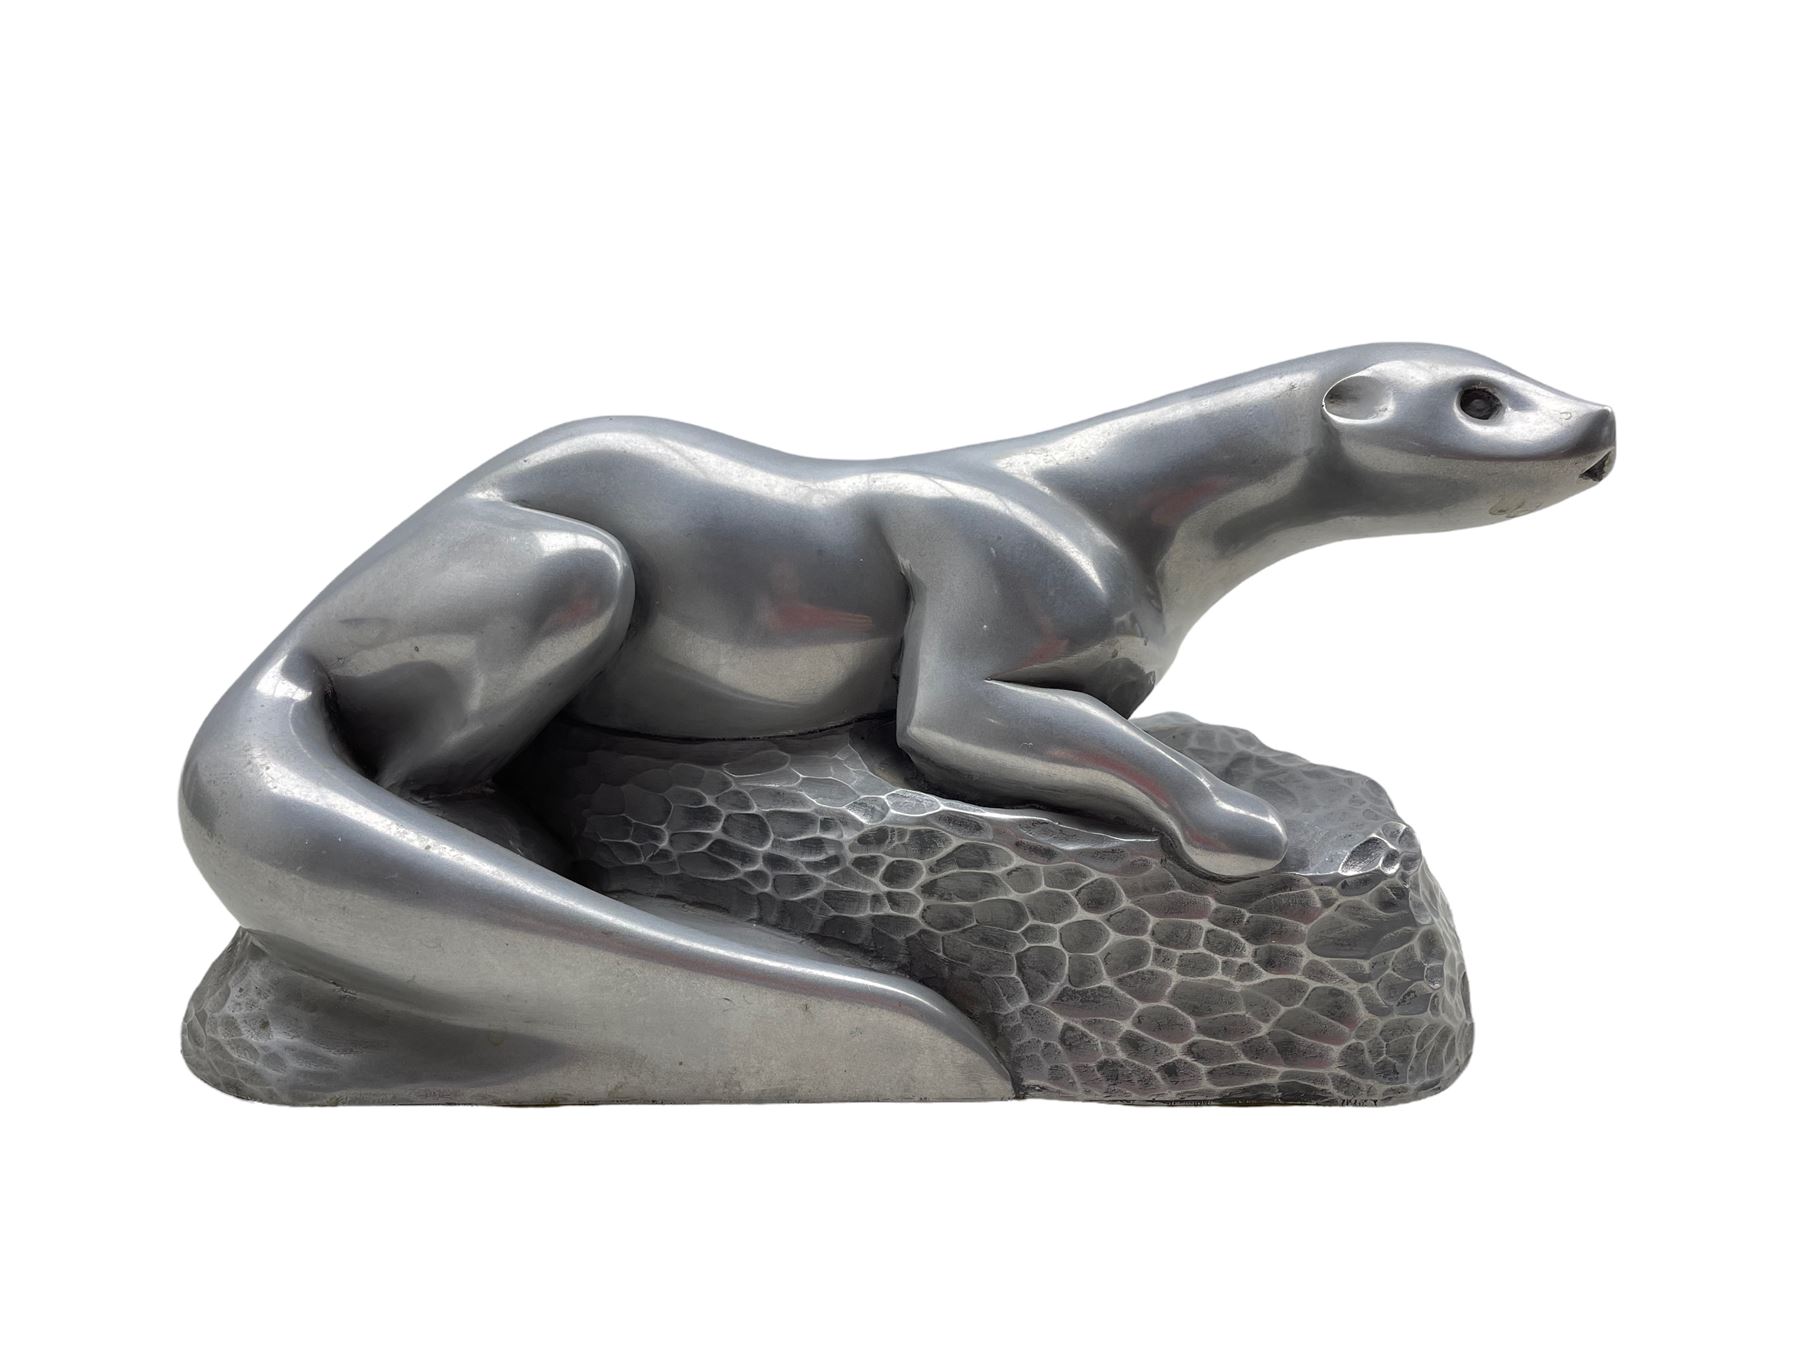 'The Fisher Collection' silvered model of an Otter by Richard Fisher